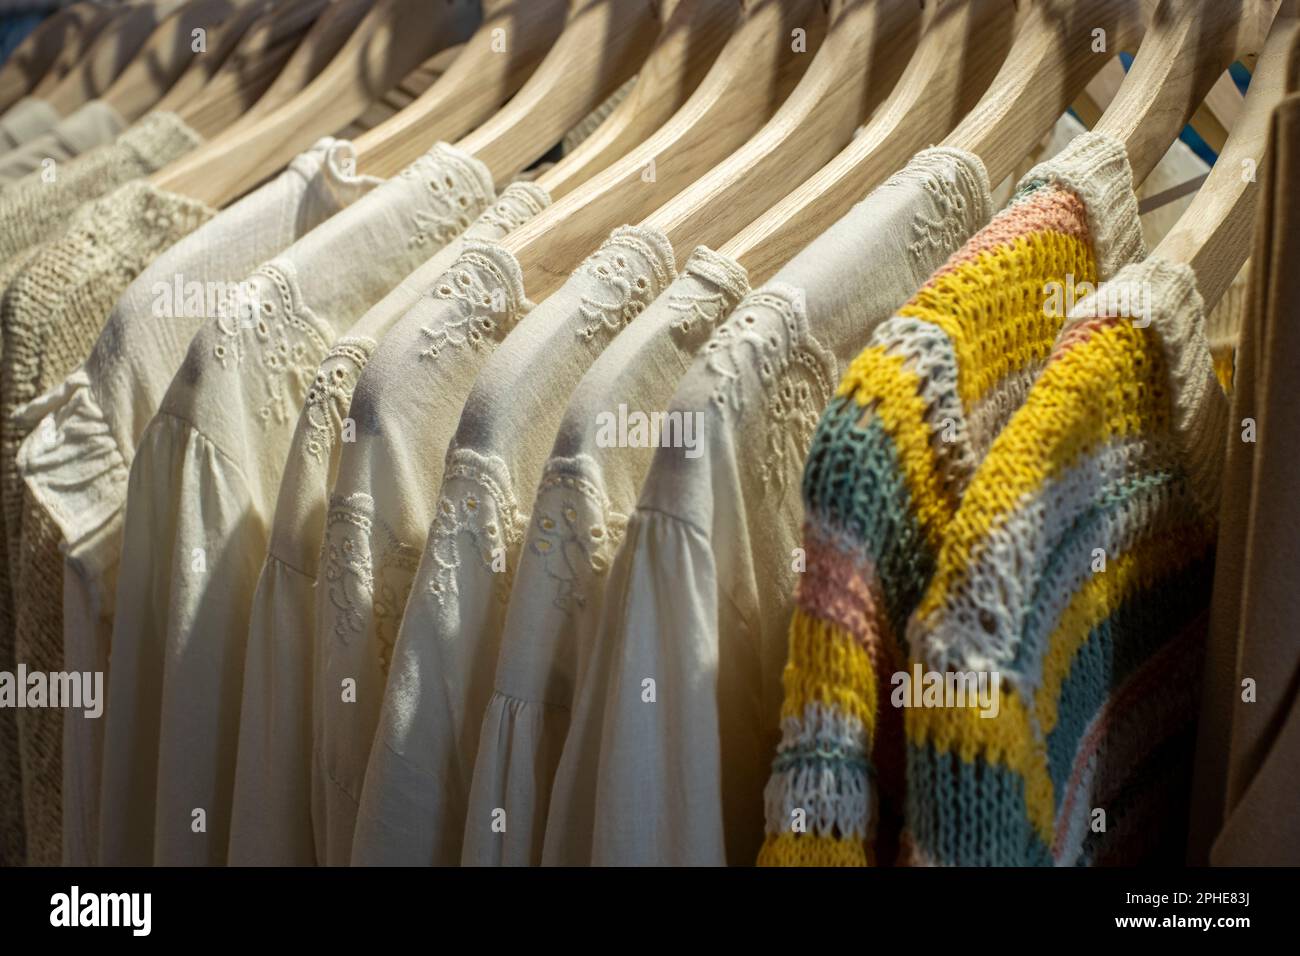 https://c8.alamy.com/comp/2PHE83J/spring-garments-hanging-on-hangers-in-a-store-selective-focus-2PHE83J.jpg